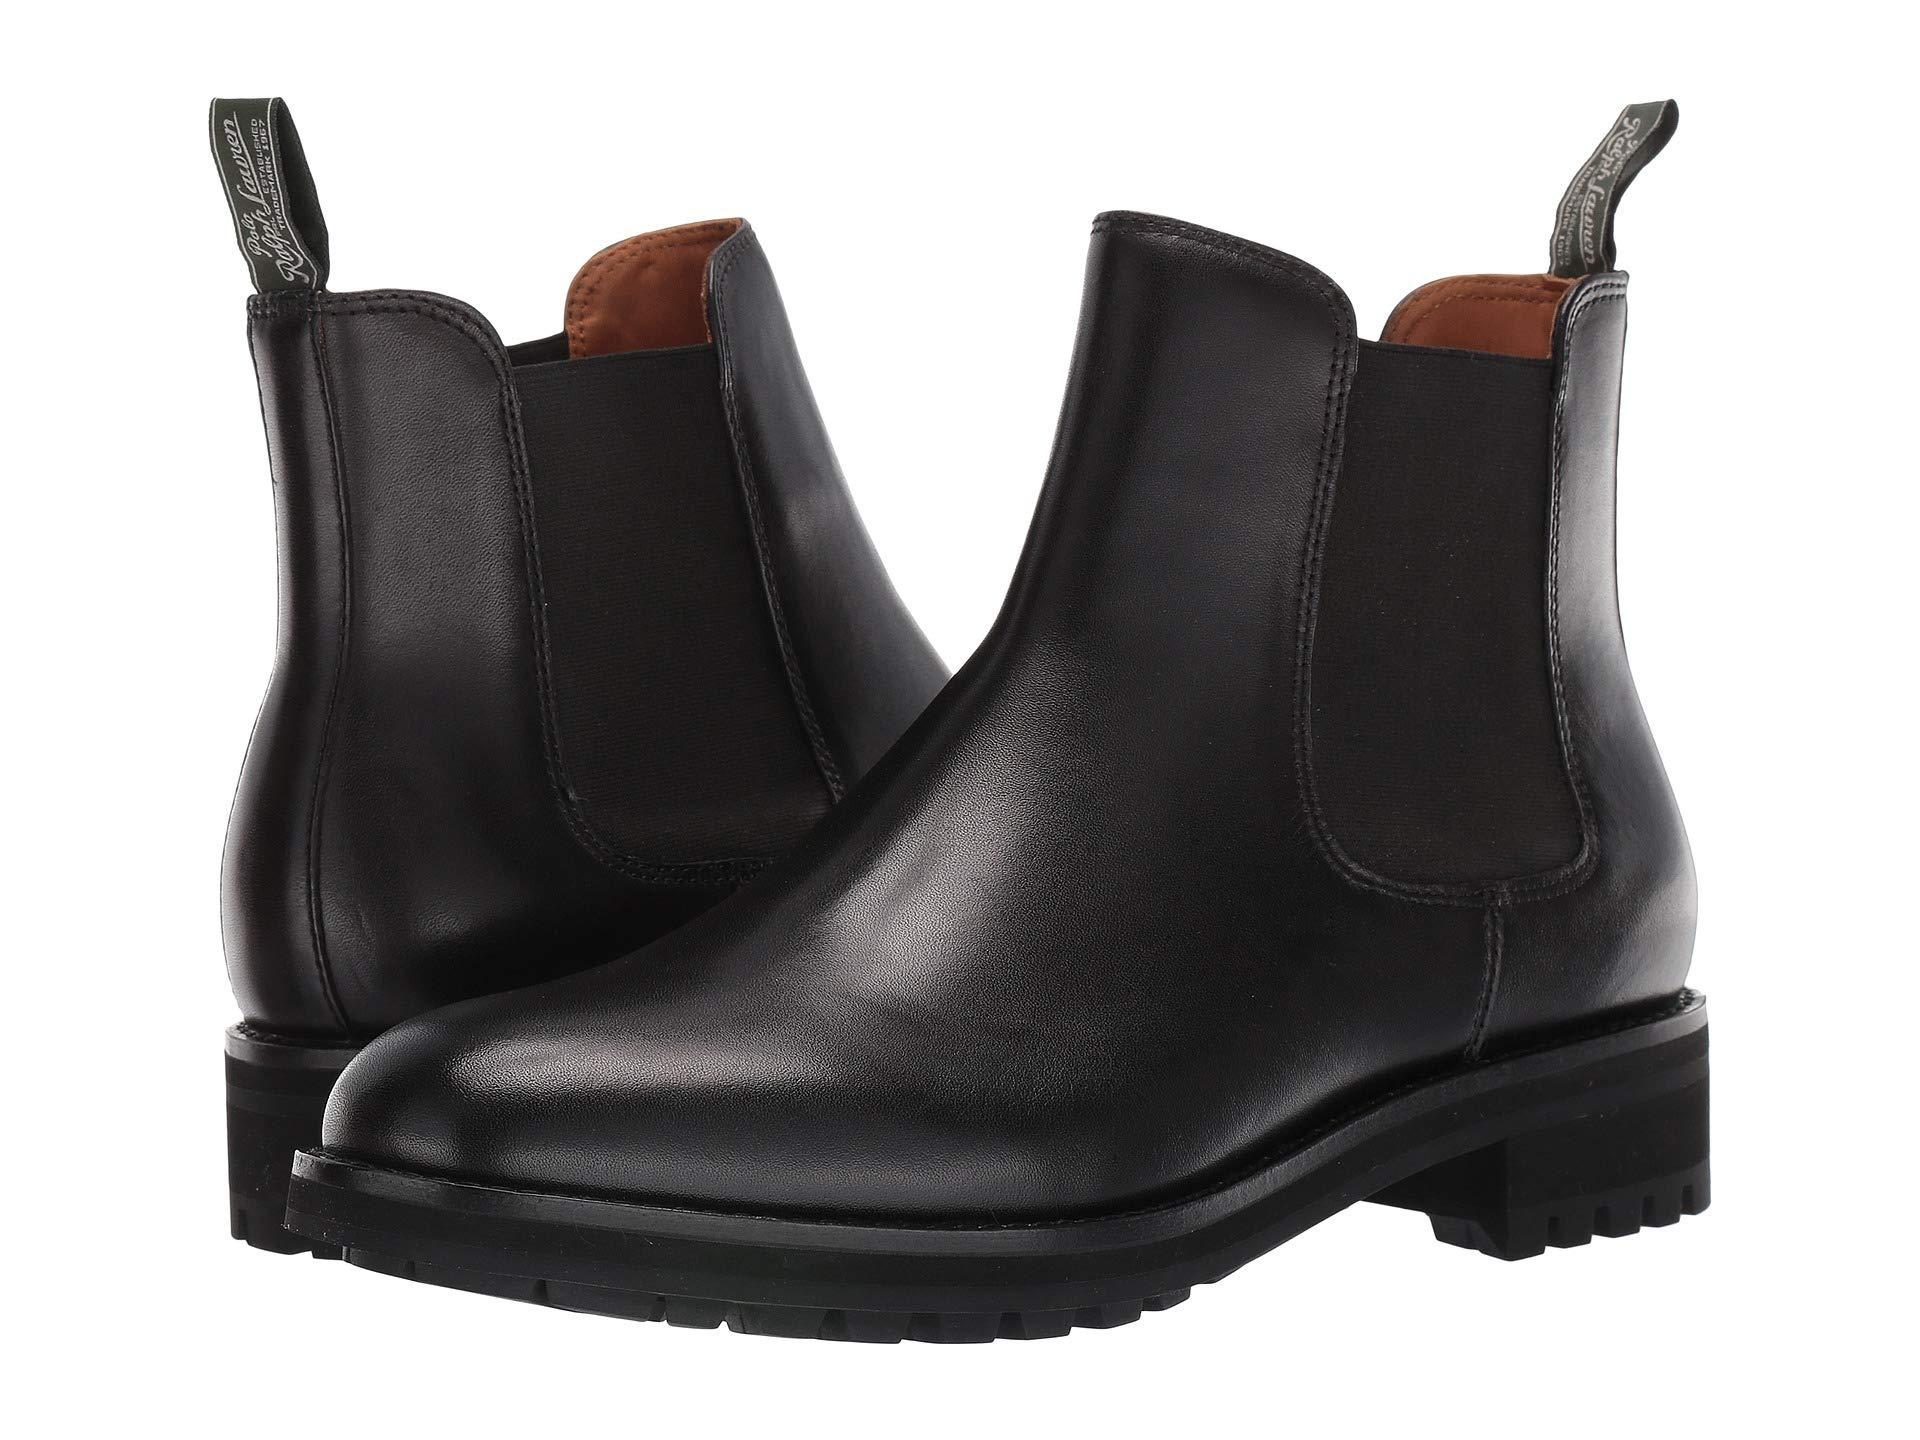 polo chelsea boots,OFF 76%,www.concordehotels.com.tr